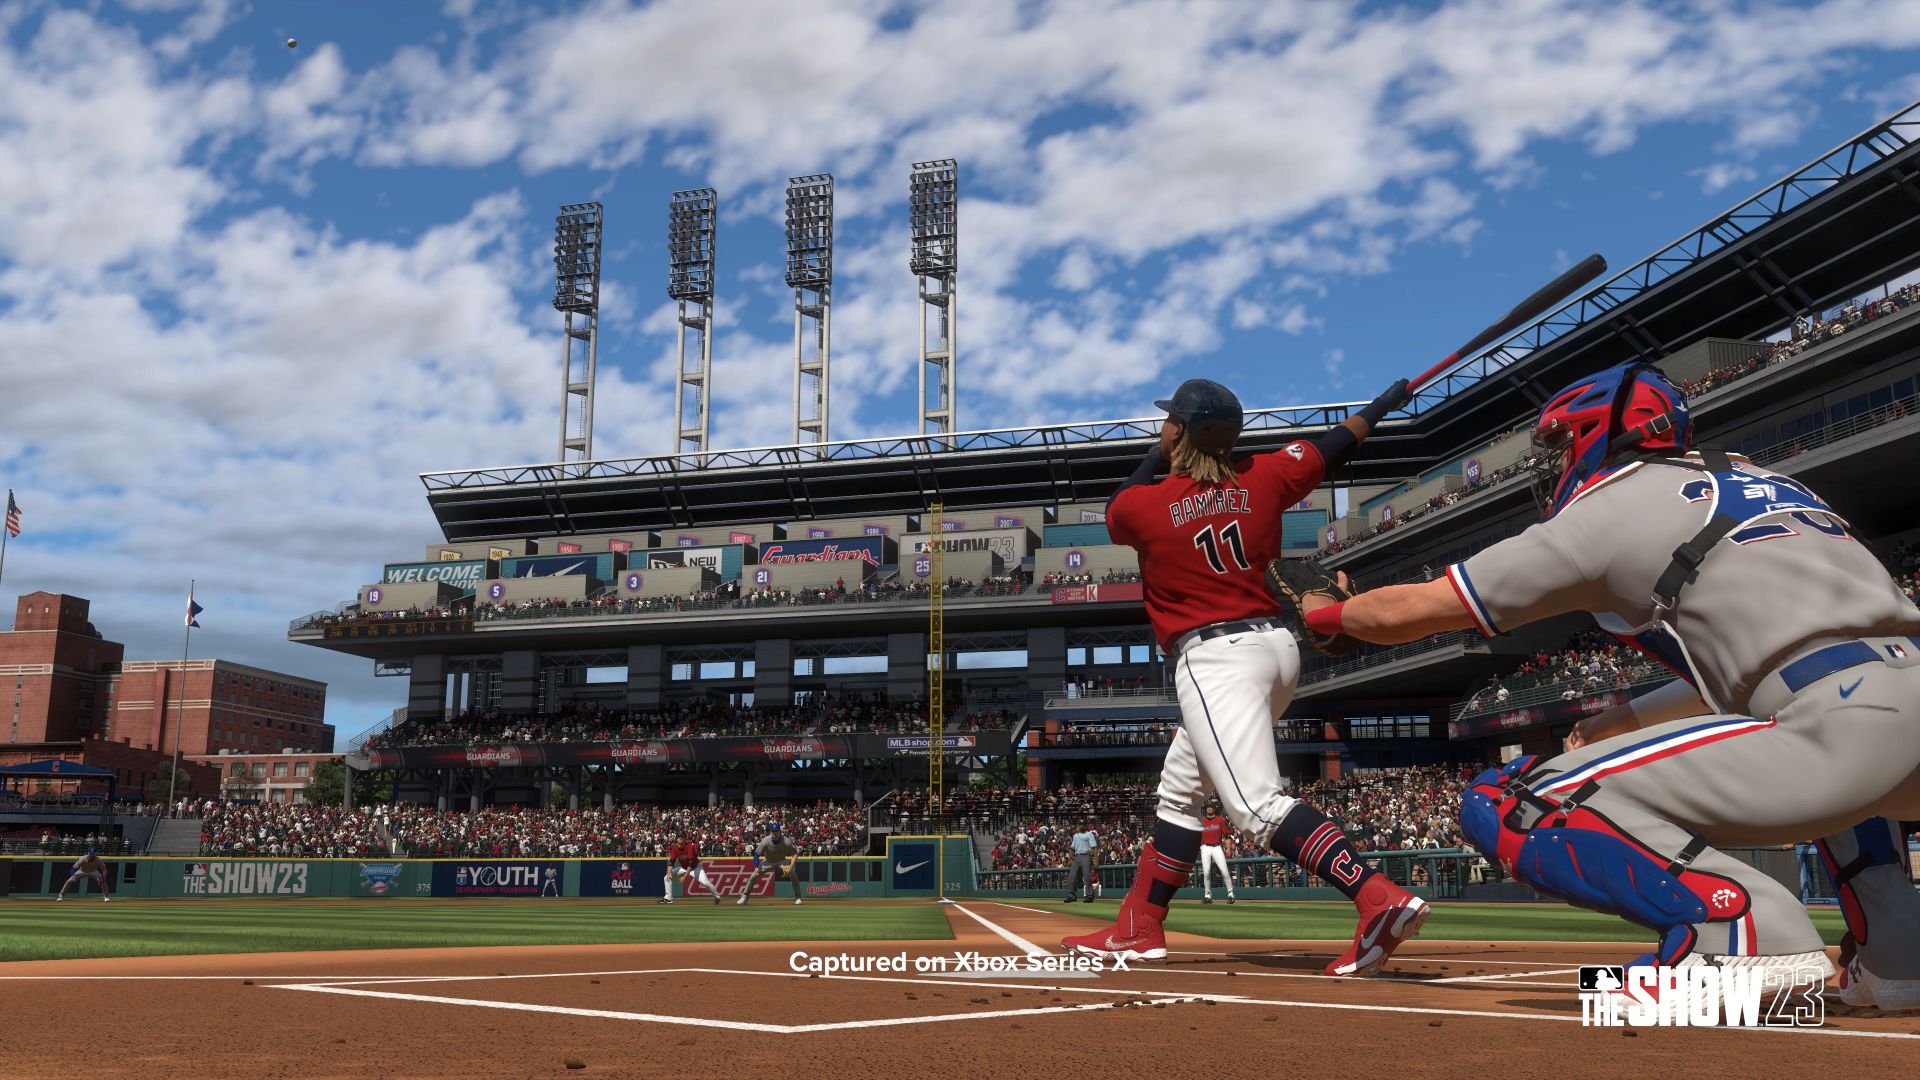 MLB The Show 23: How to Use Your Ballplayer in Diamond Dynasty